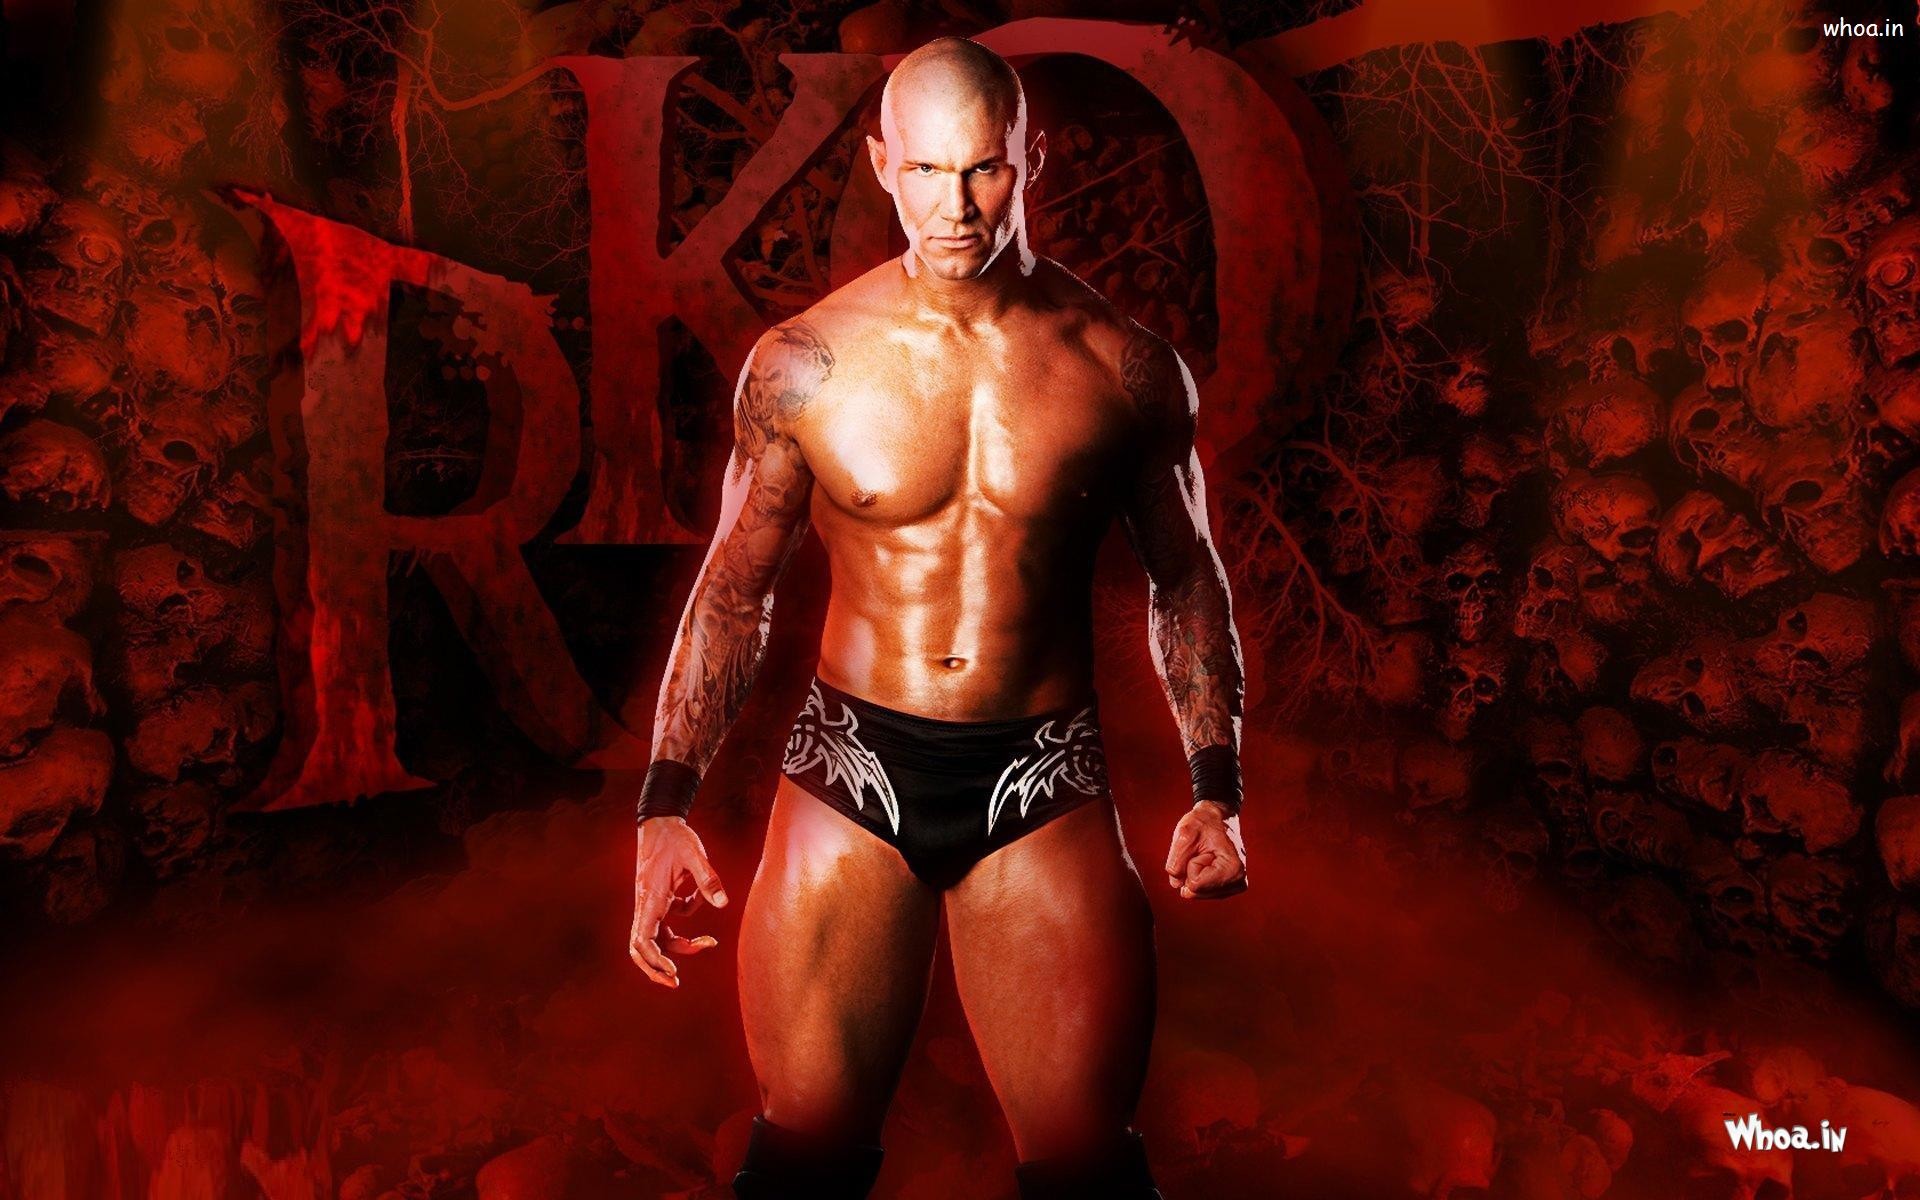 Randy Orton Images Wallpapers.